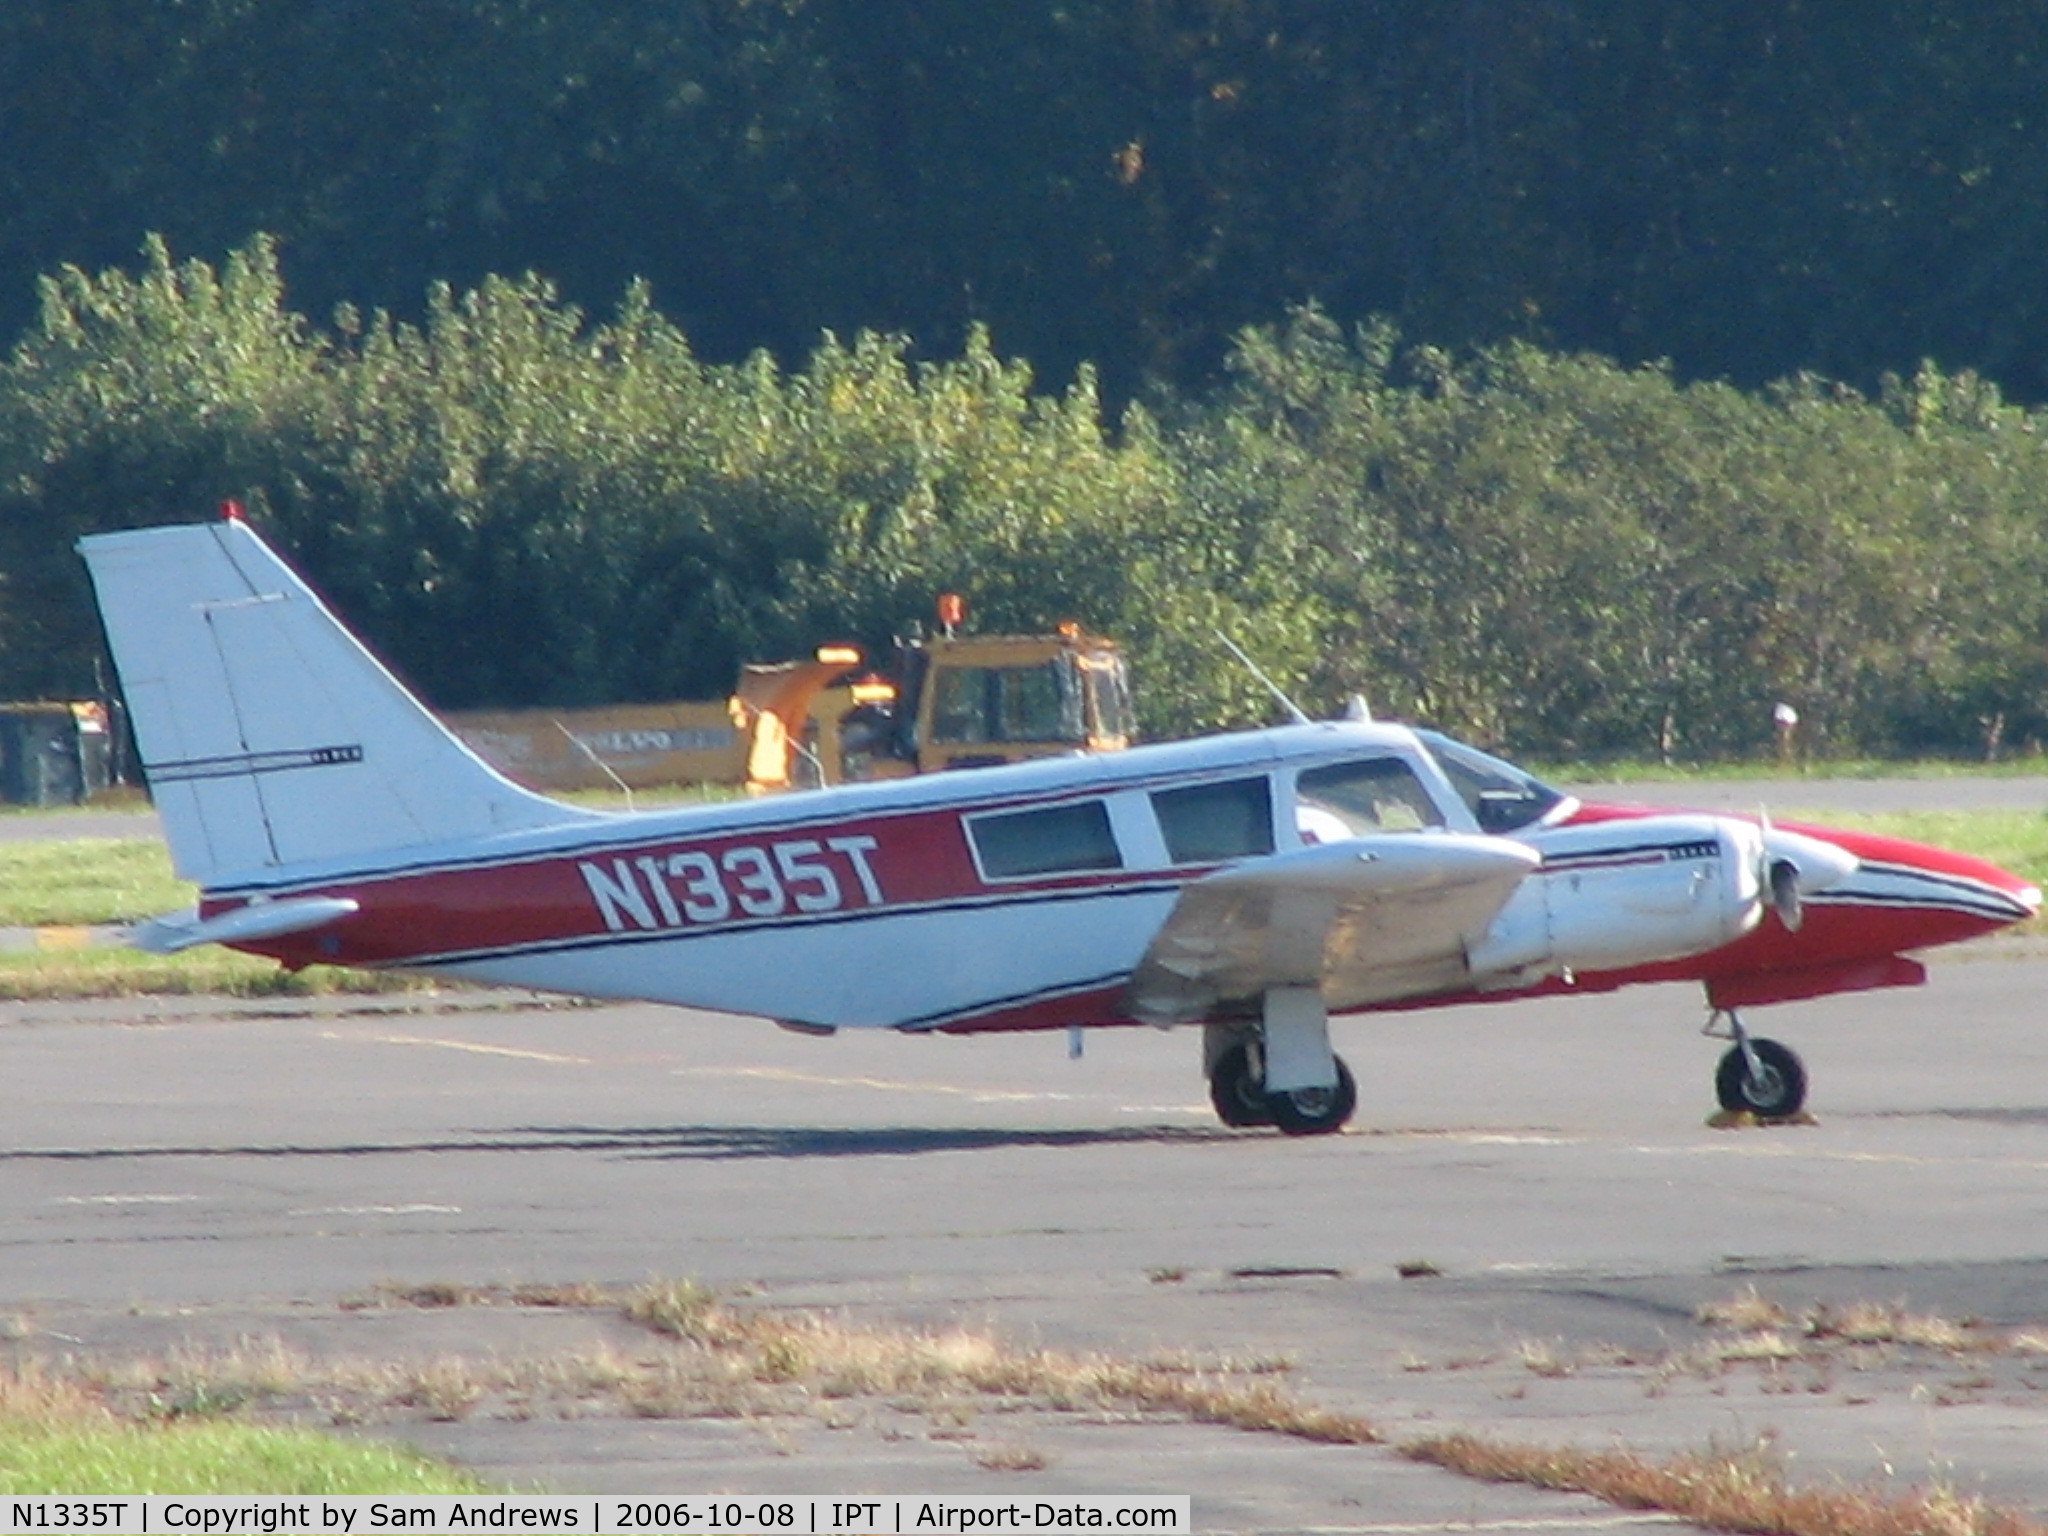 N1335T, 1972 Piper PA-34-200 C/N 34-7250291, Just found this!  Thought I'd post it.